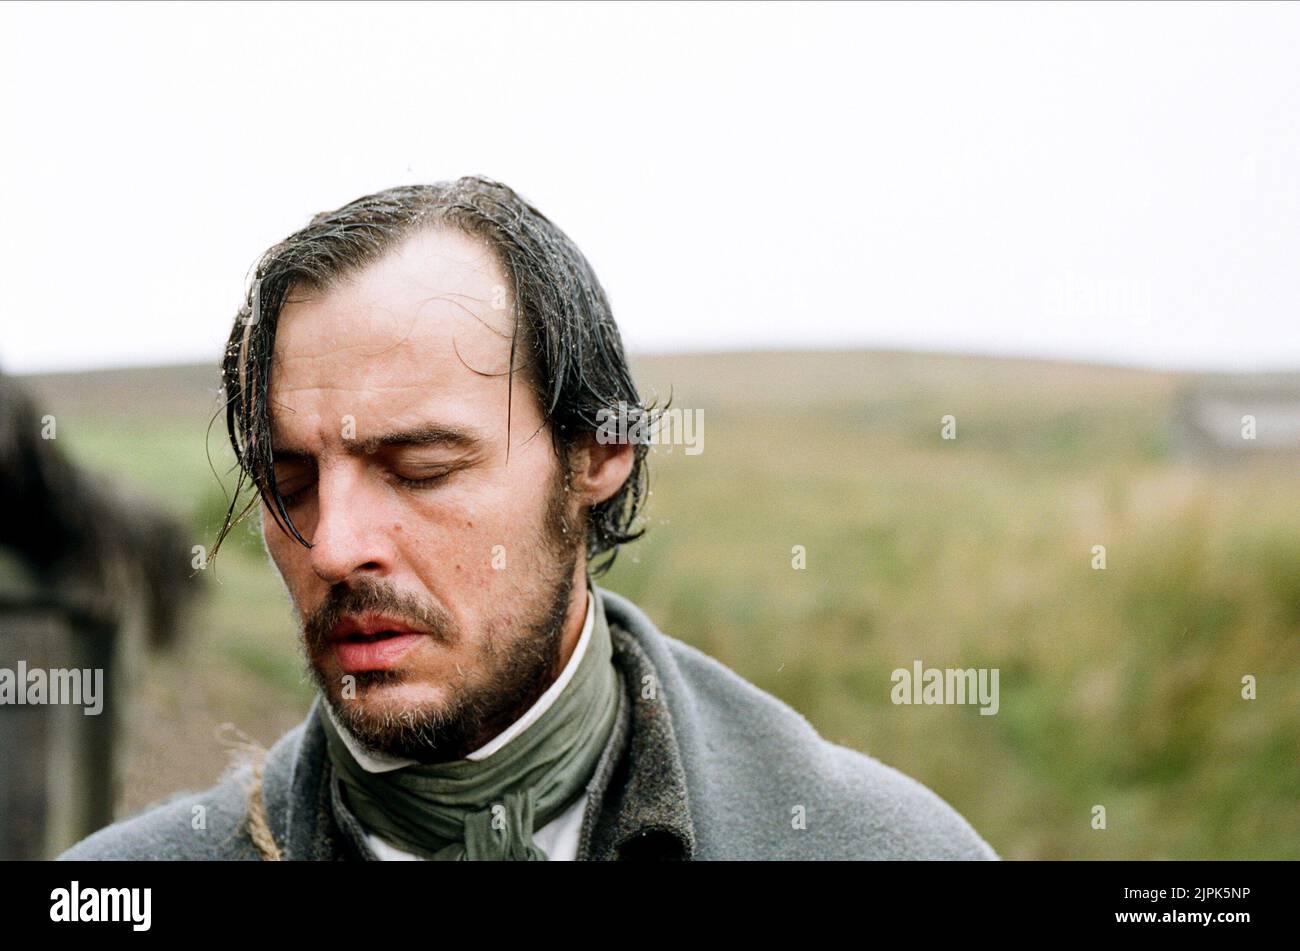 LEE SHAW, WUTHERING HEIGHTS, 2011 Stockfoto